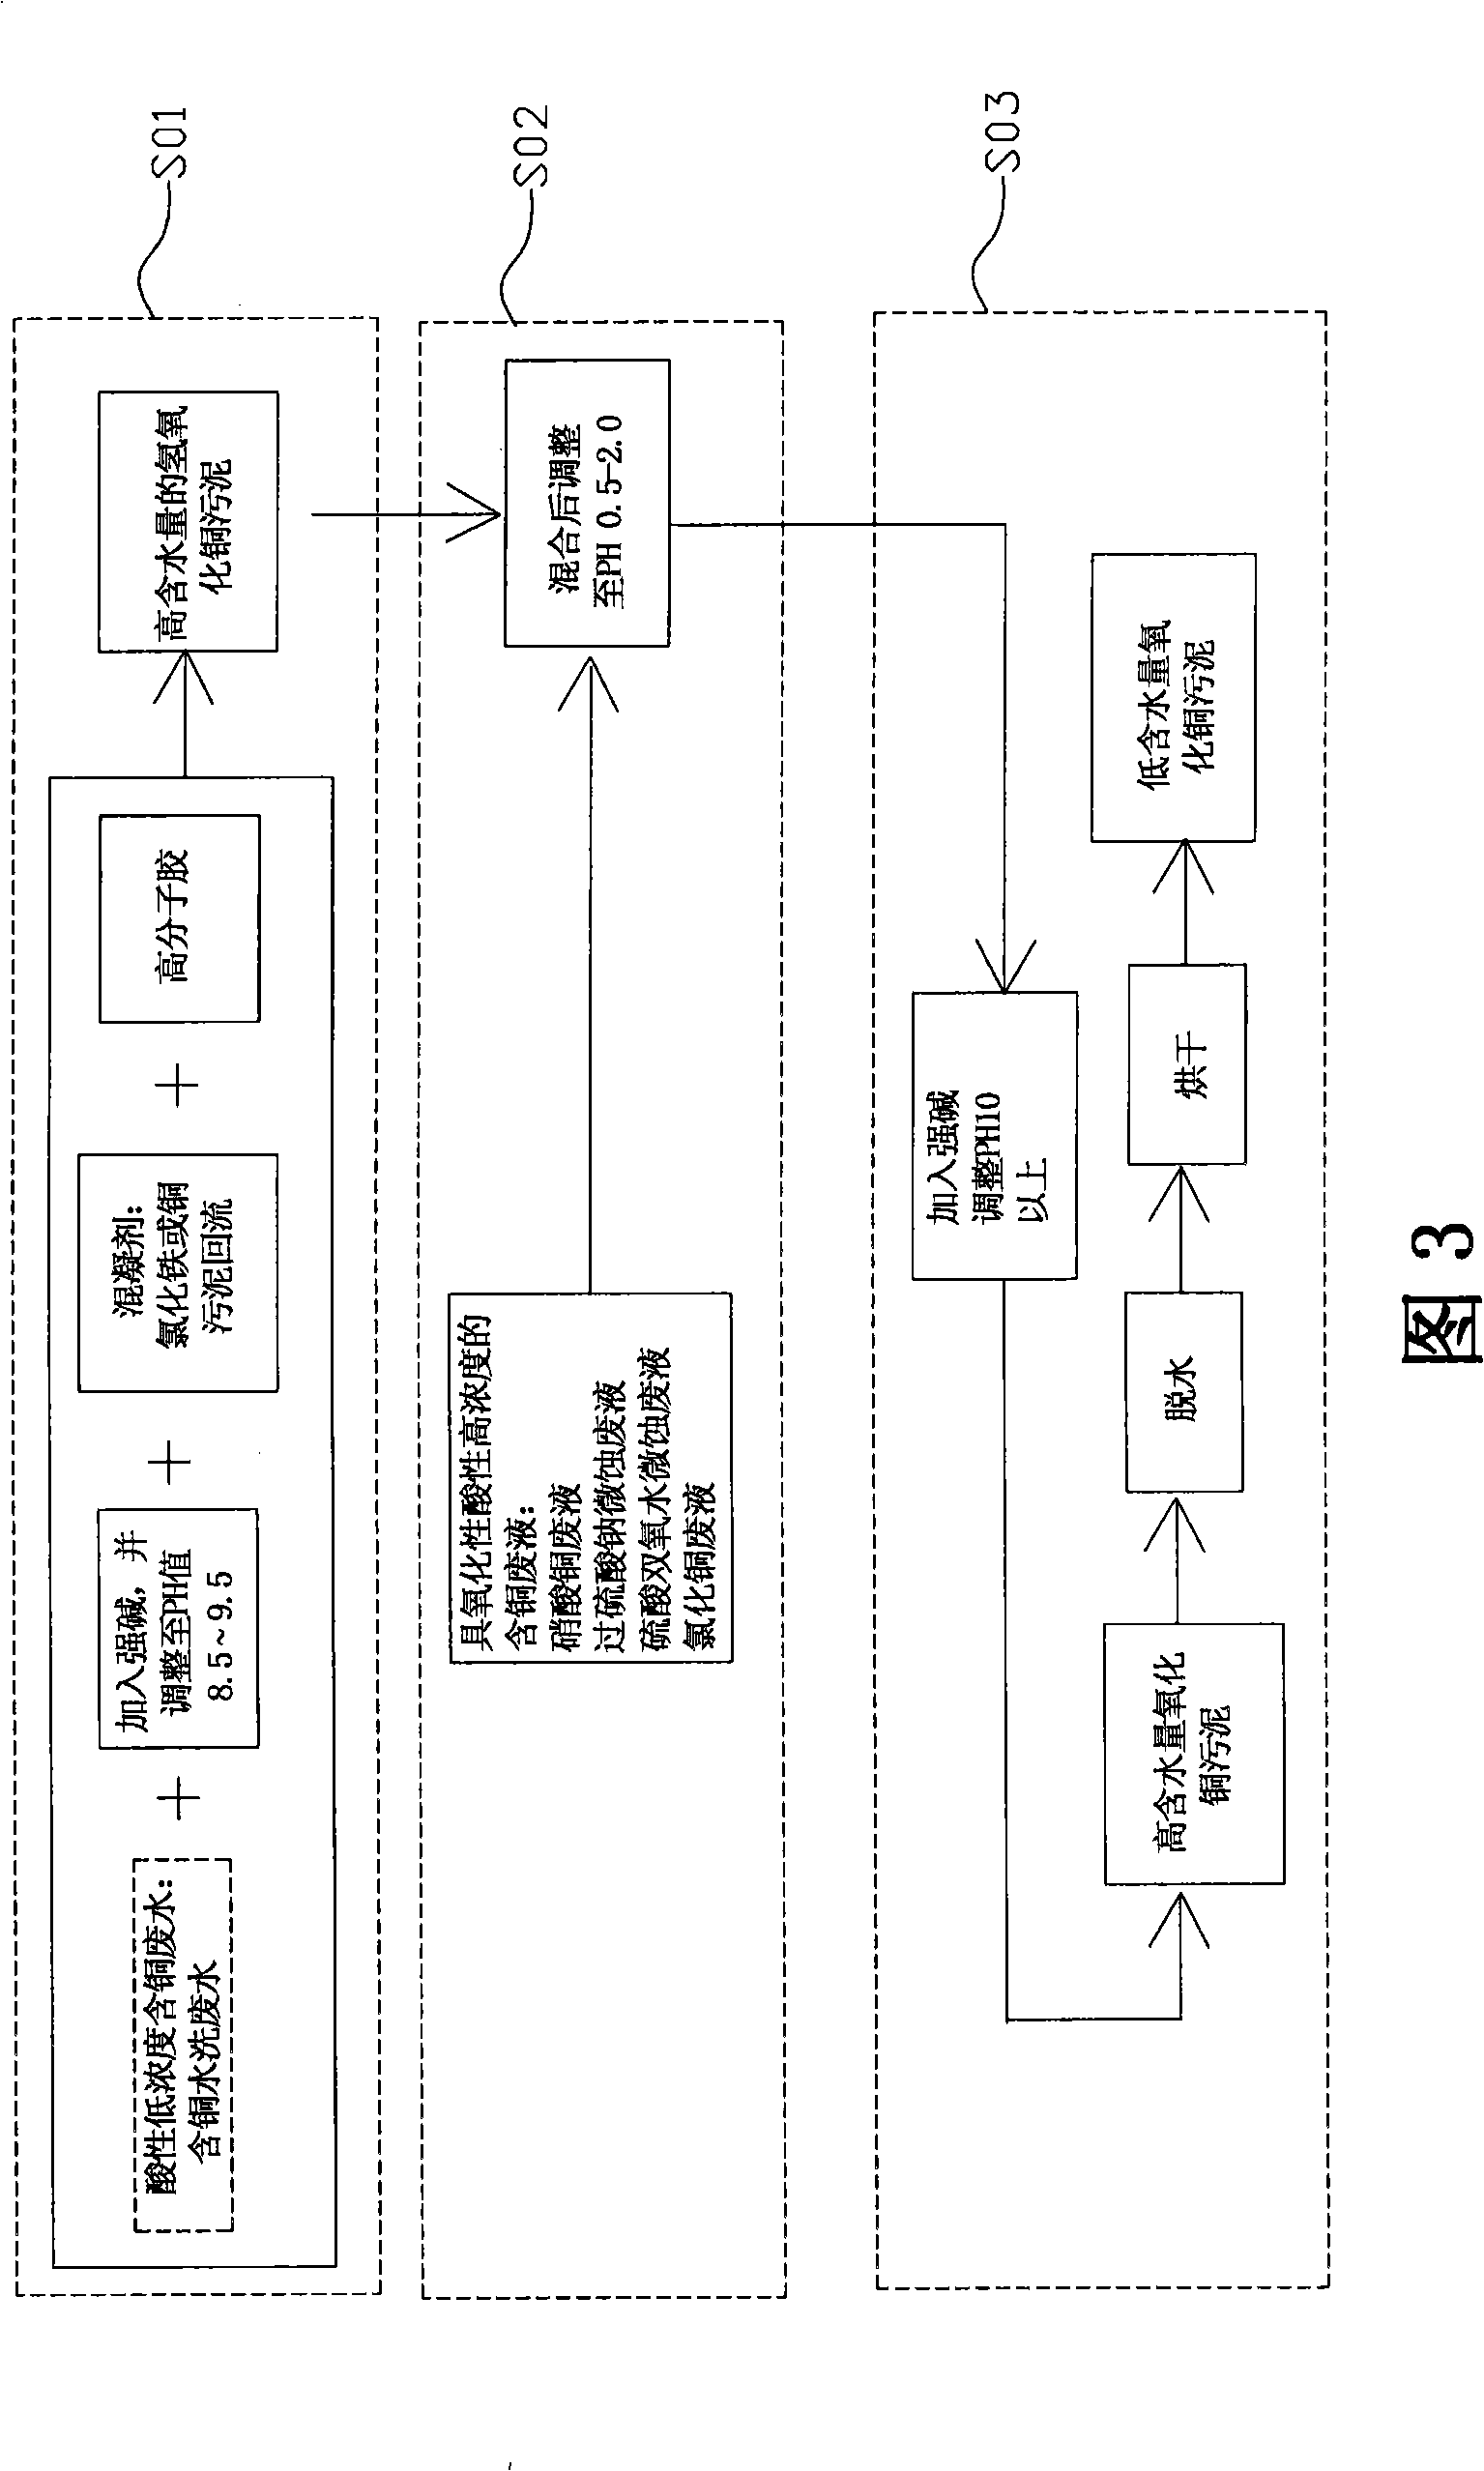 Processing method for generating highly copper containing sewage sludge with copper containing wastewater or waste liquor